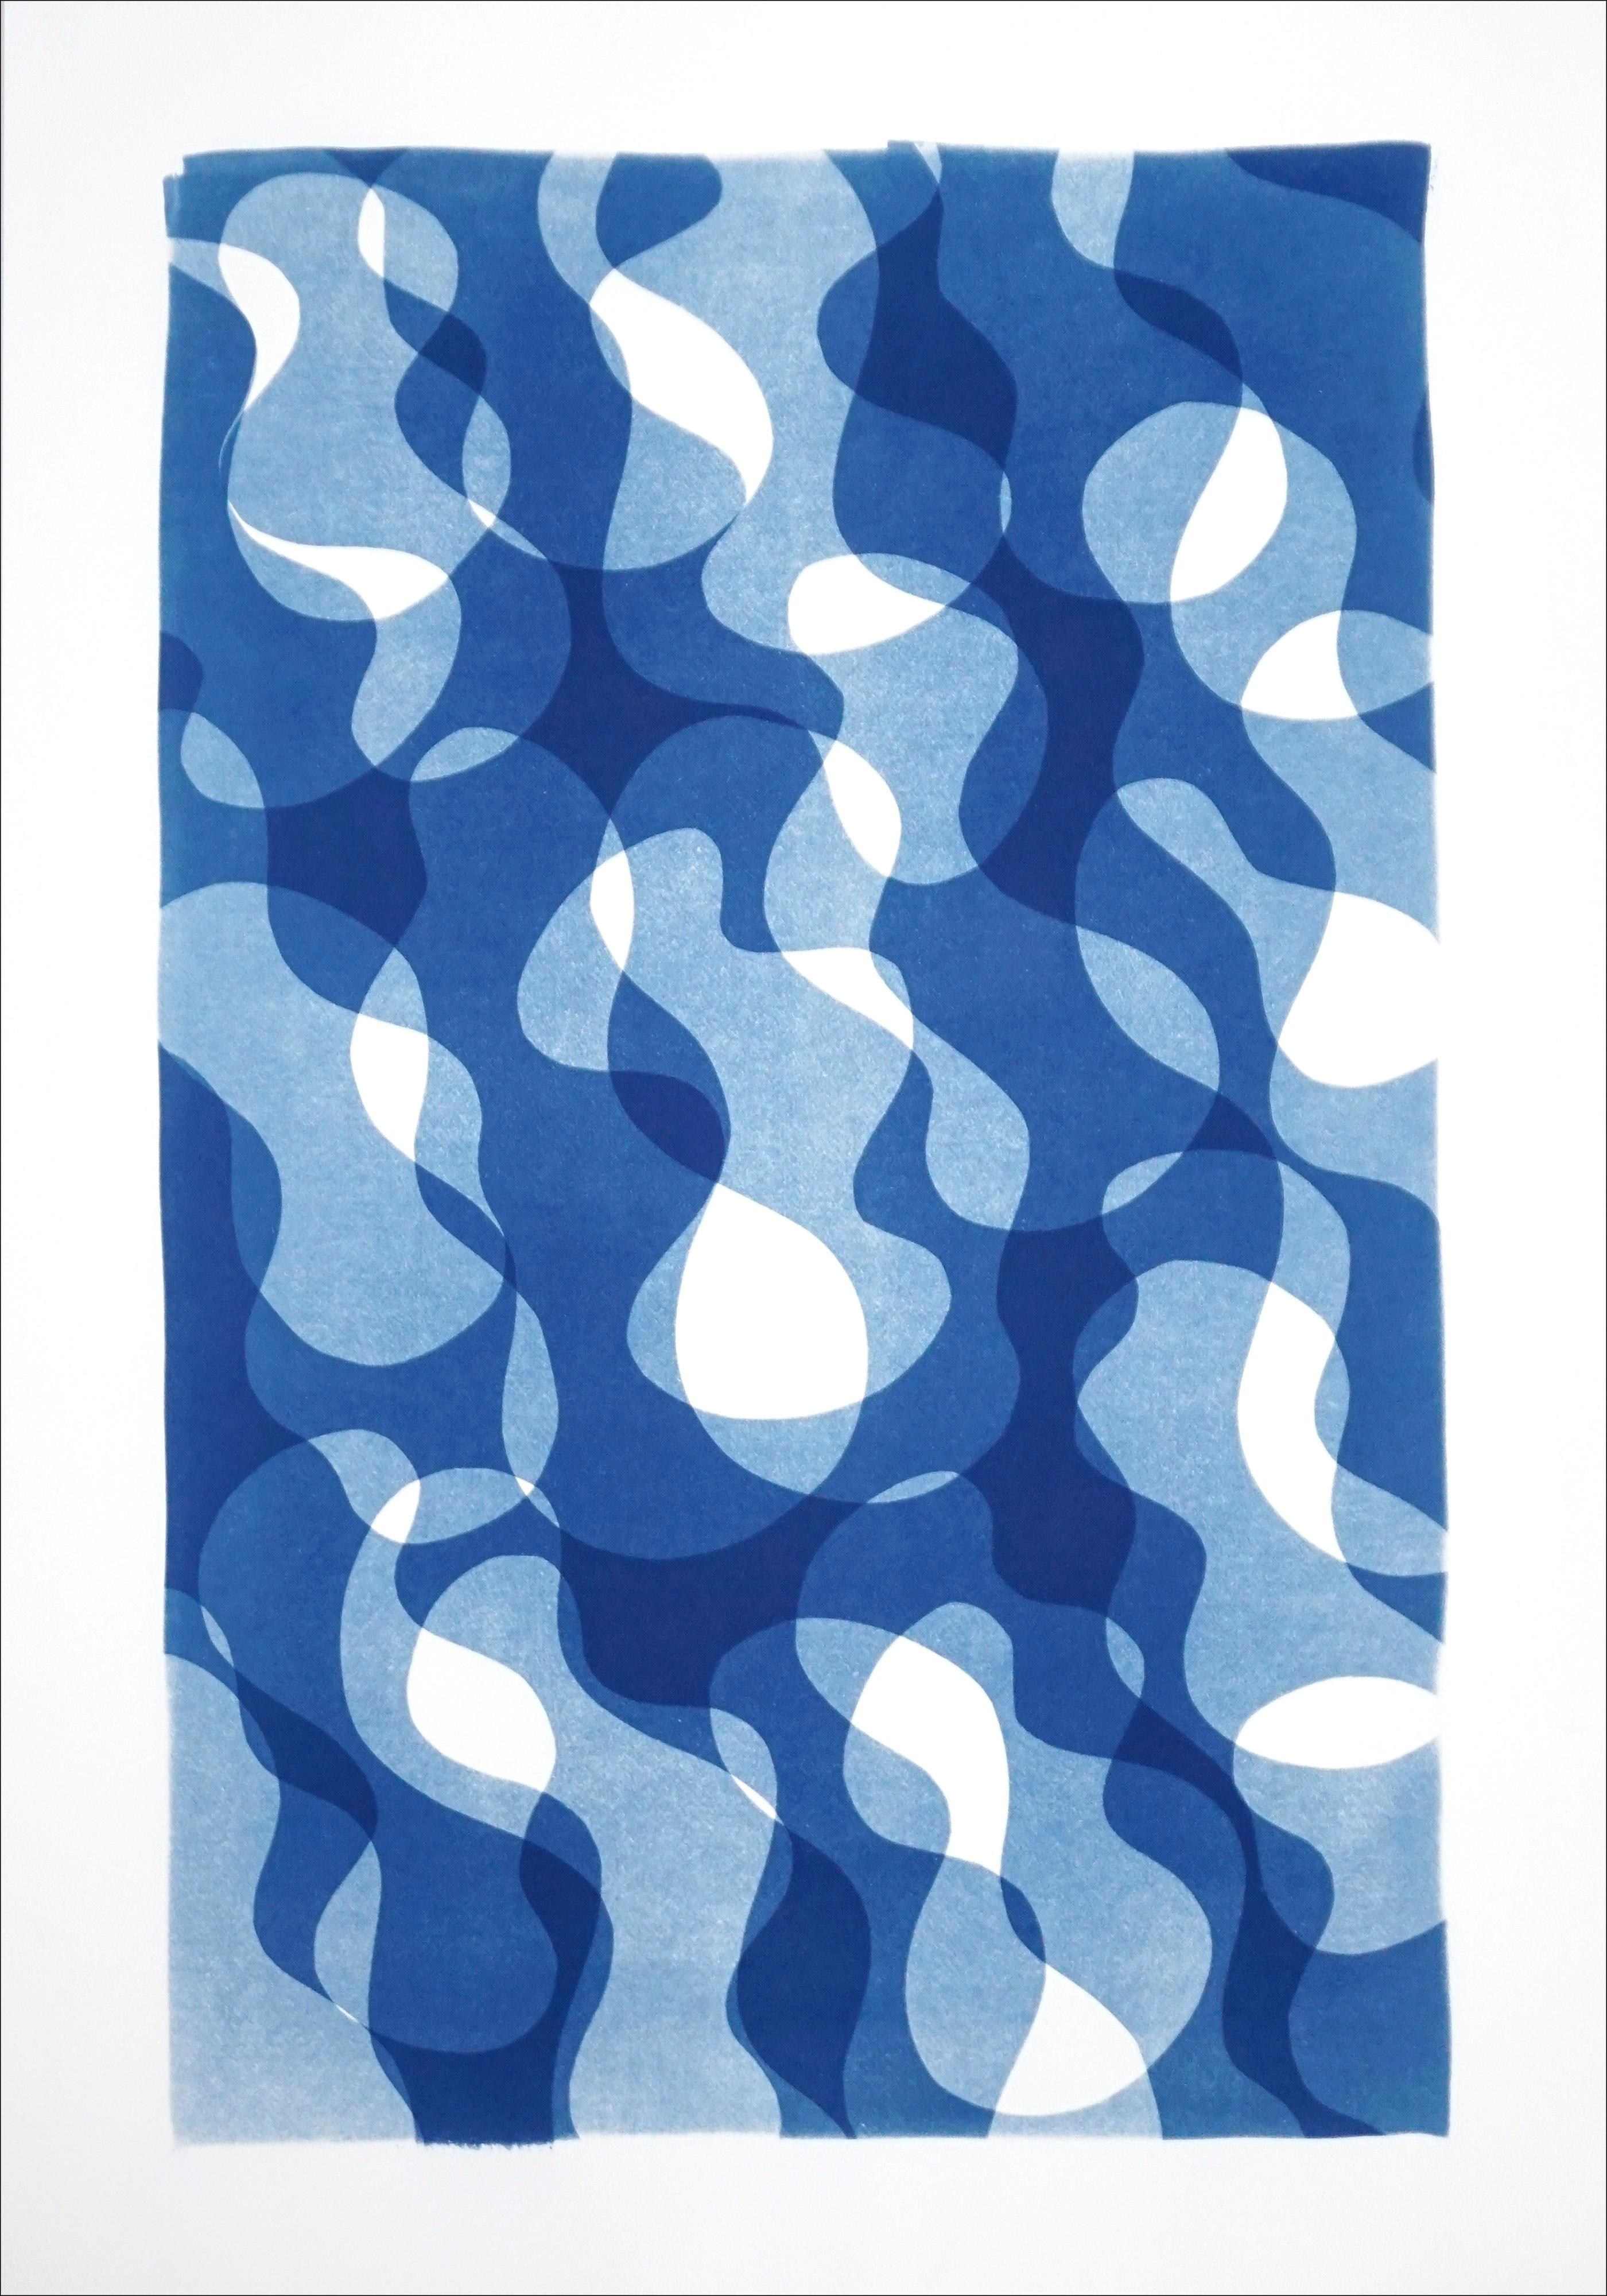 Kind of Cyan Abstract Photograph - Abstract Print of Geometric Water Movement in Blue Tones, Memphis Shapes Style